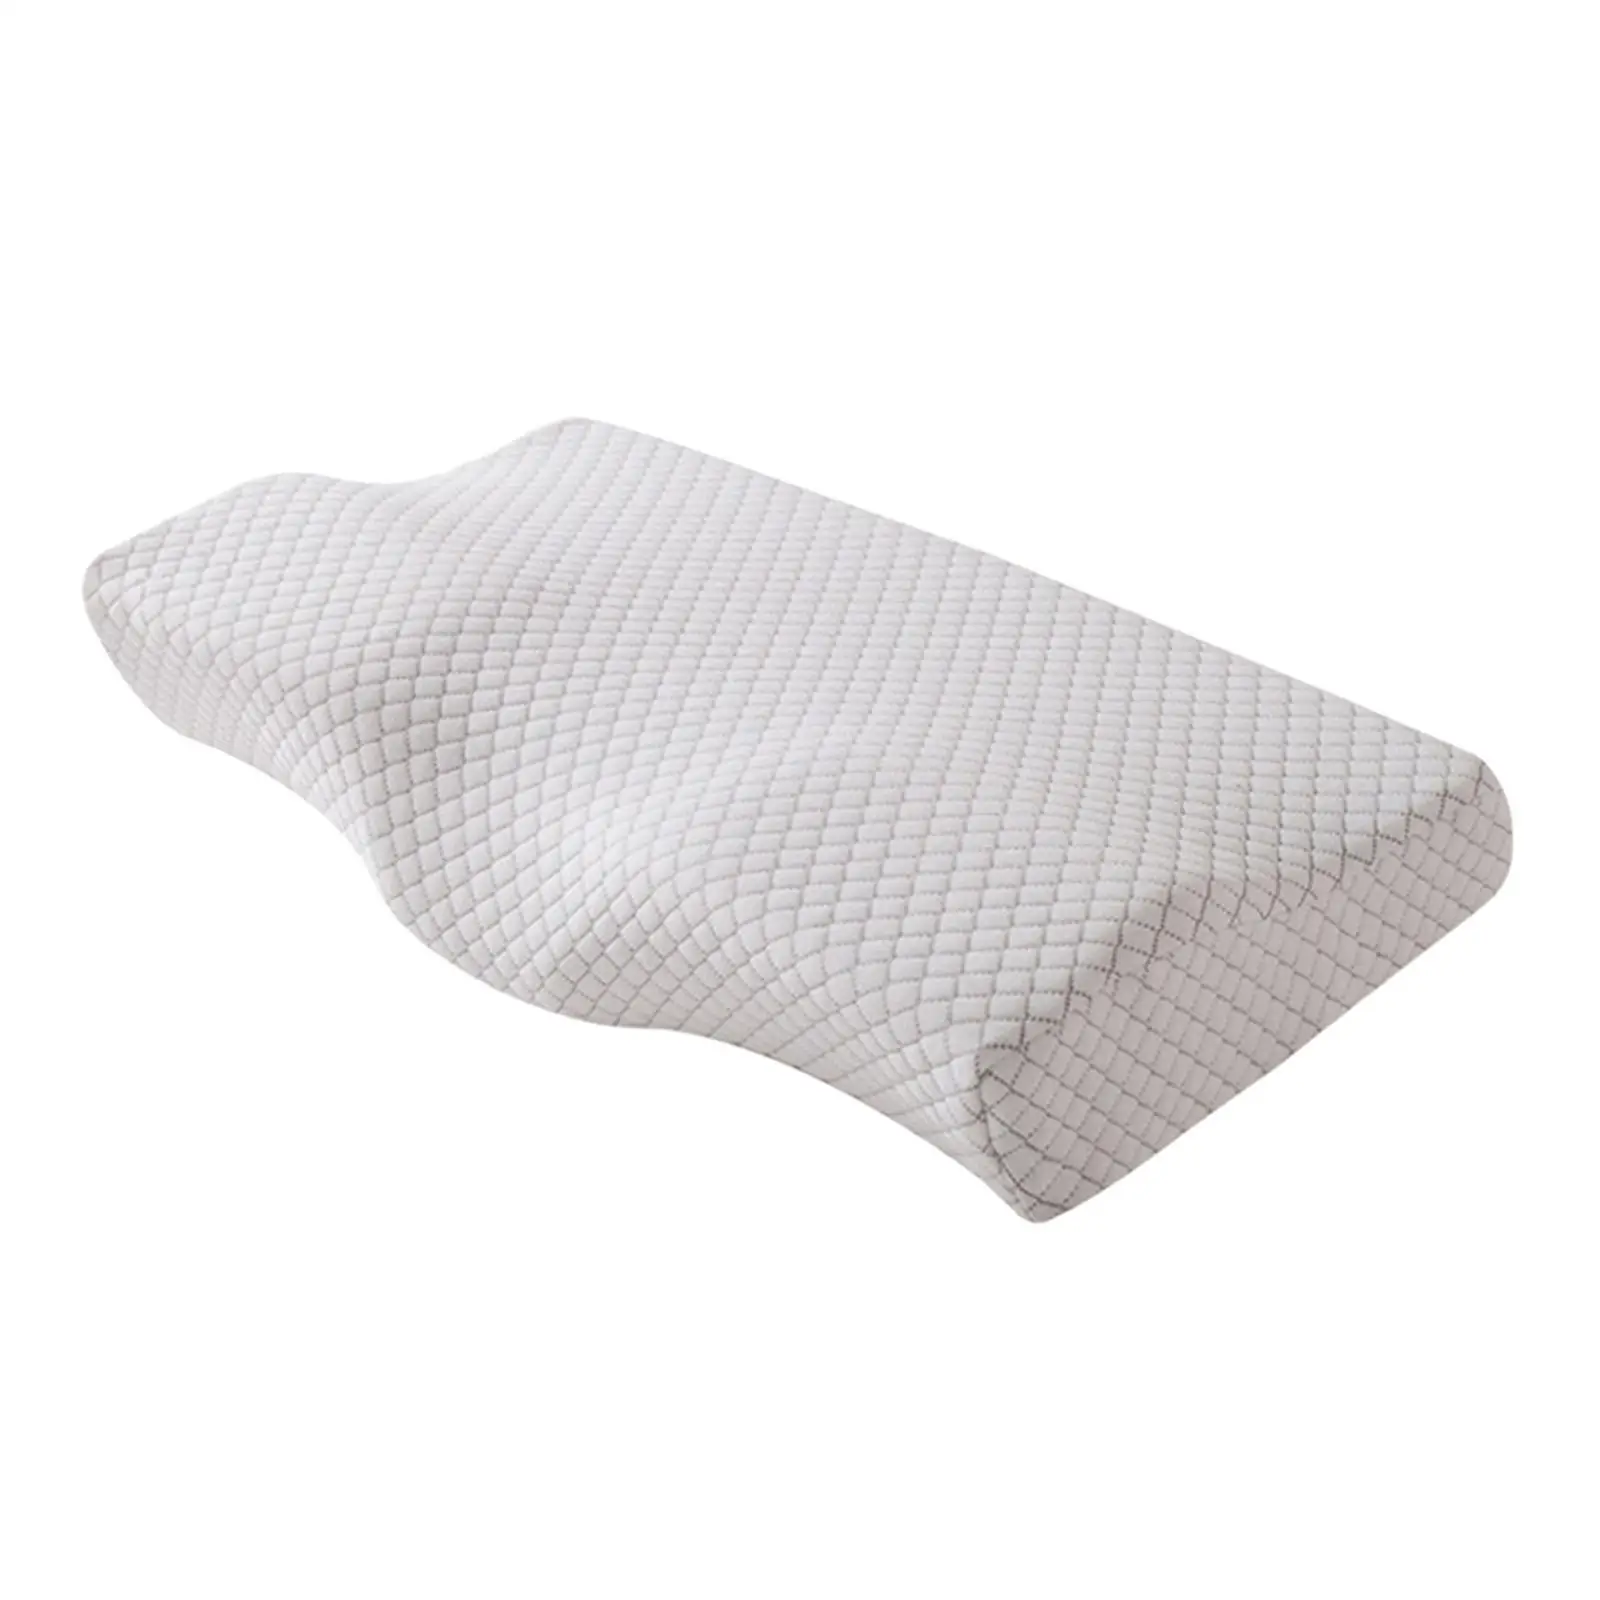 Bed Support Pillow for Hotel Sleeping Home Bedroom Adult